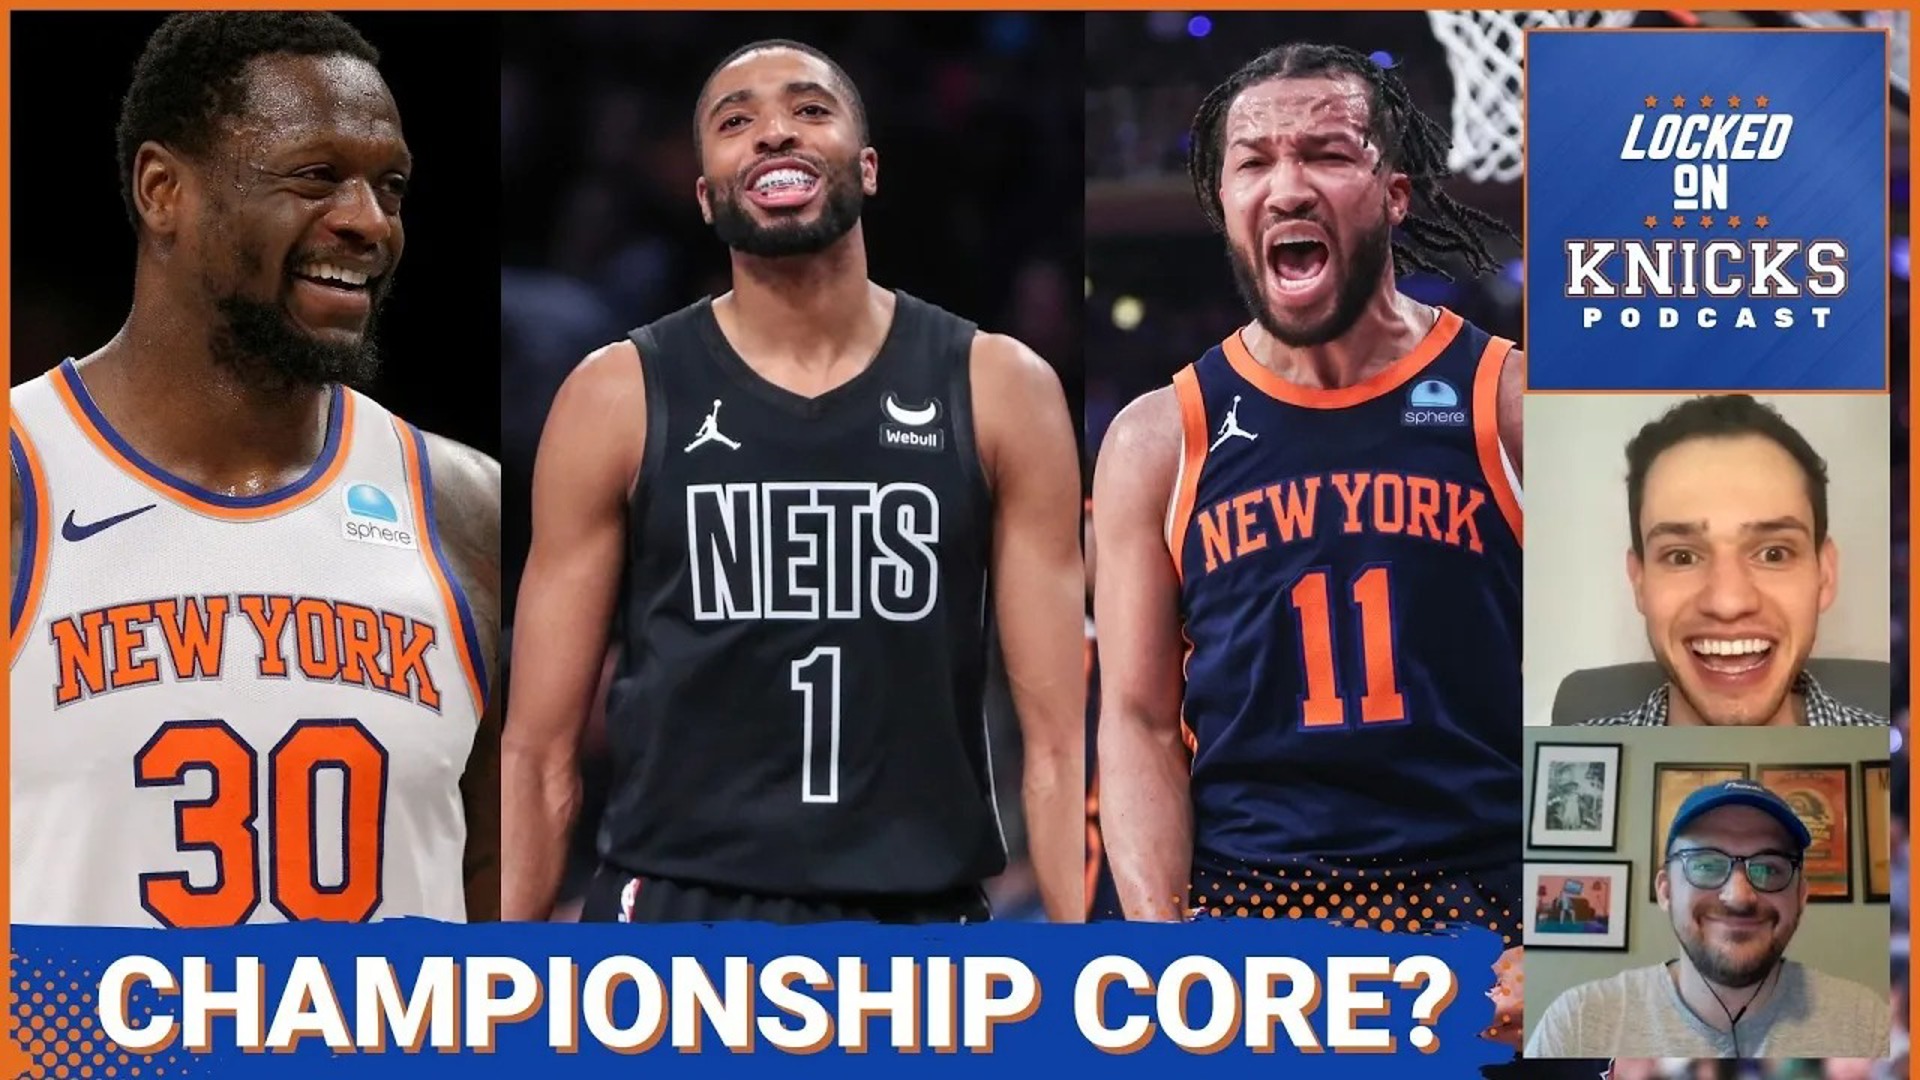 Trading five first round picks for Mikal Bridges was inarguably a franchise altering move, was it the right one for the New York Knicks?